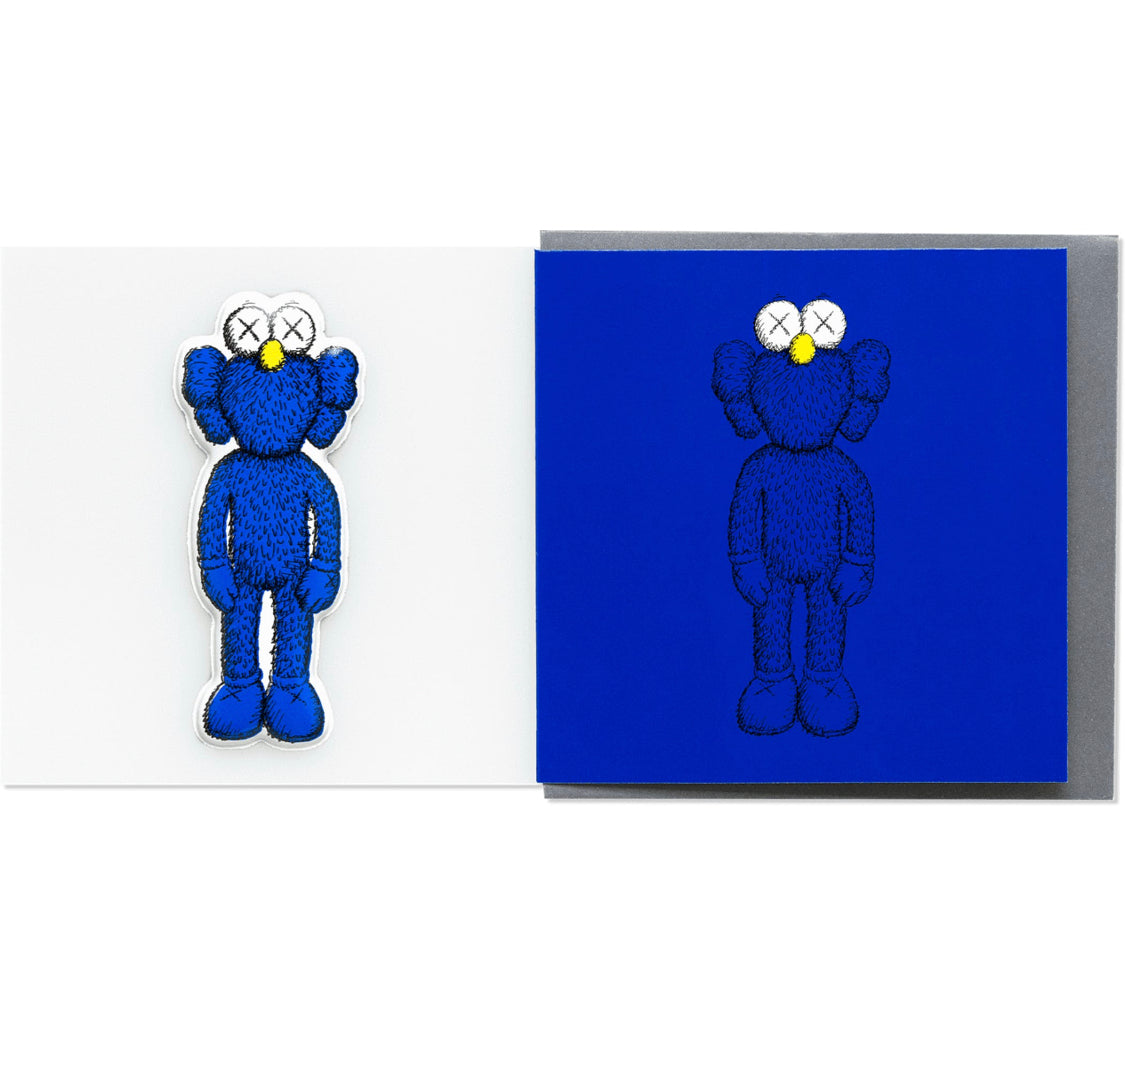 KAWS x NGV BFF Greeting Card with Puffy Sticker (Blue), 2019